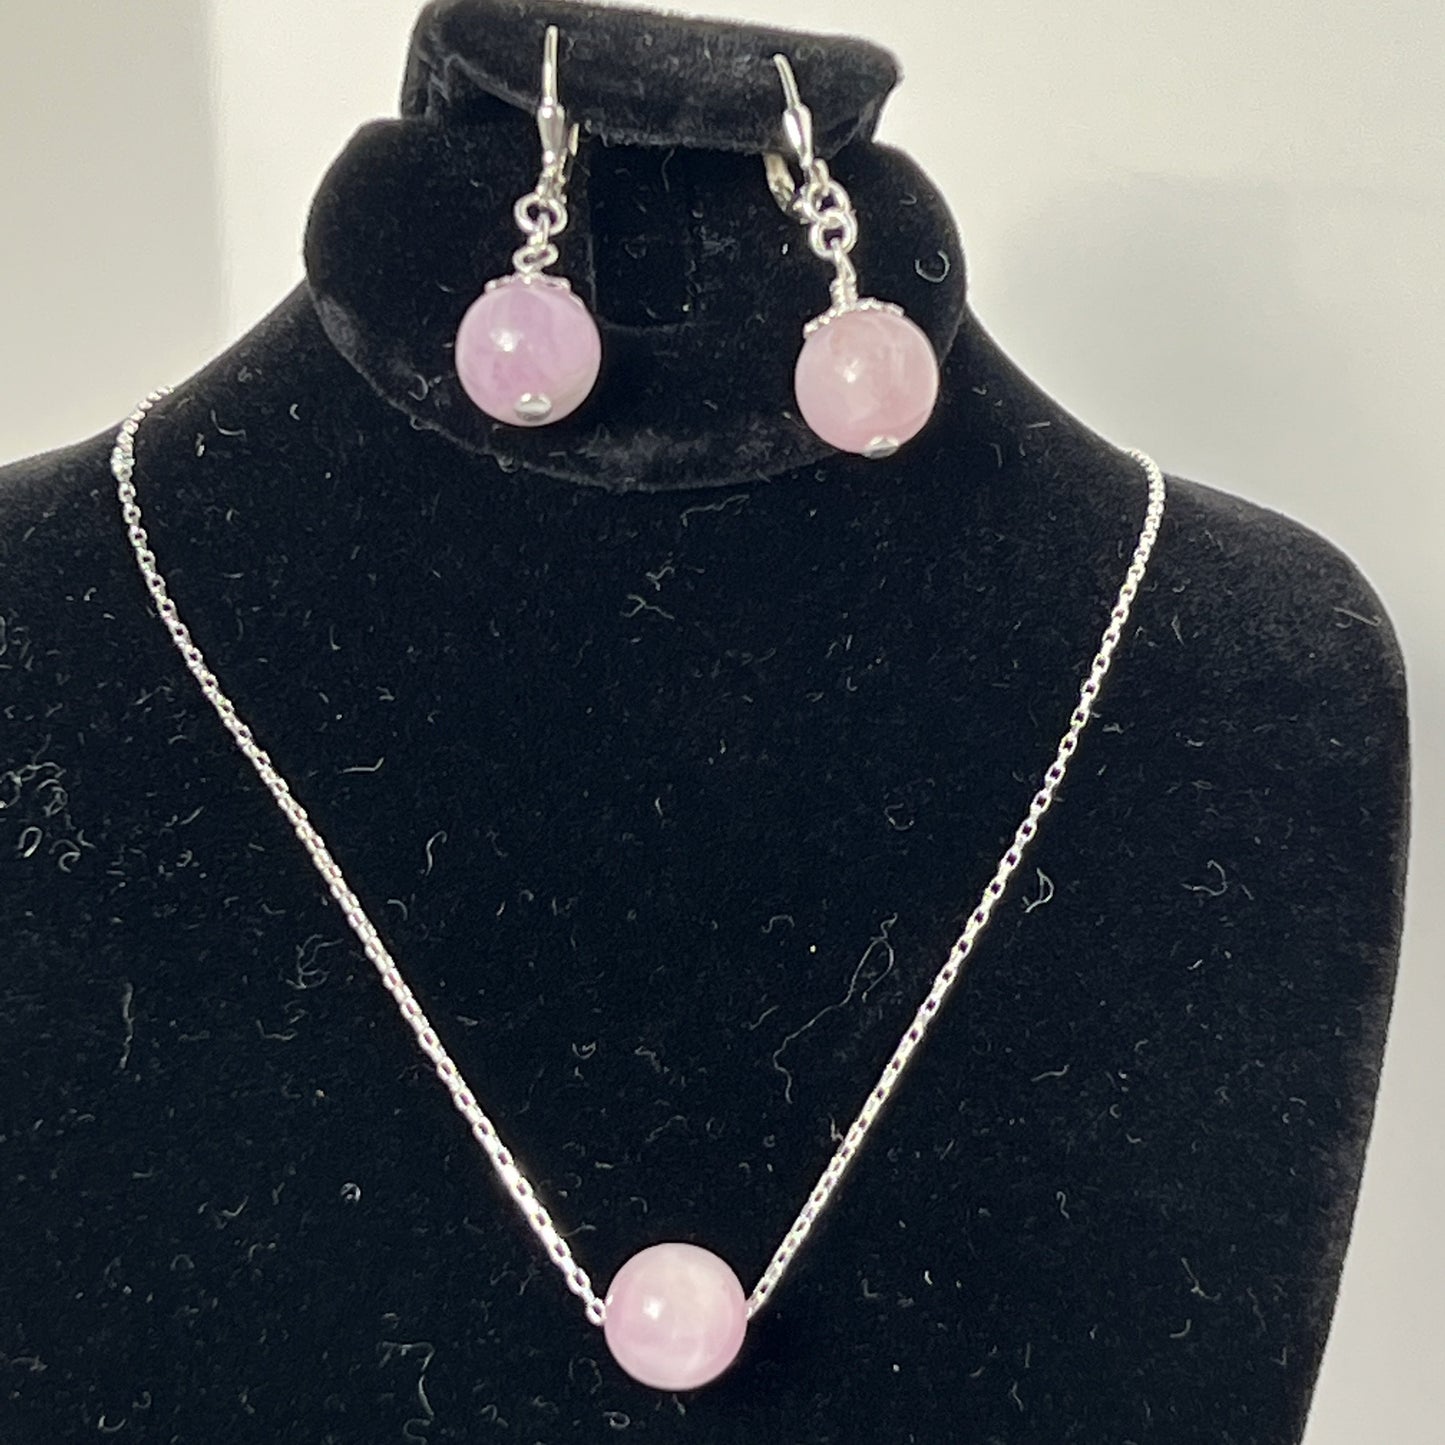 10mm Kunzite beads earrings and pendant with magnet clasp